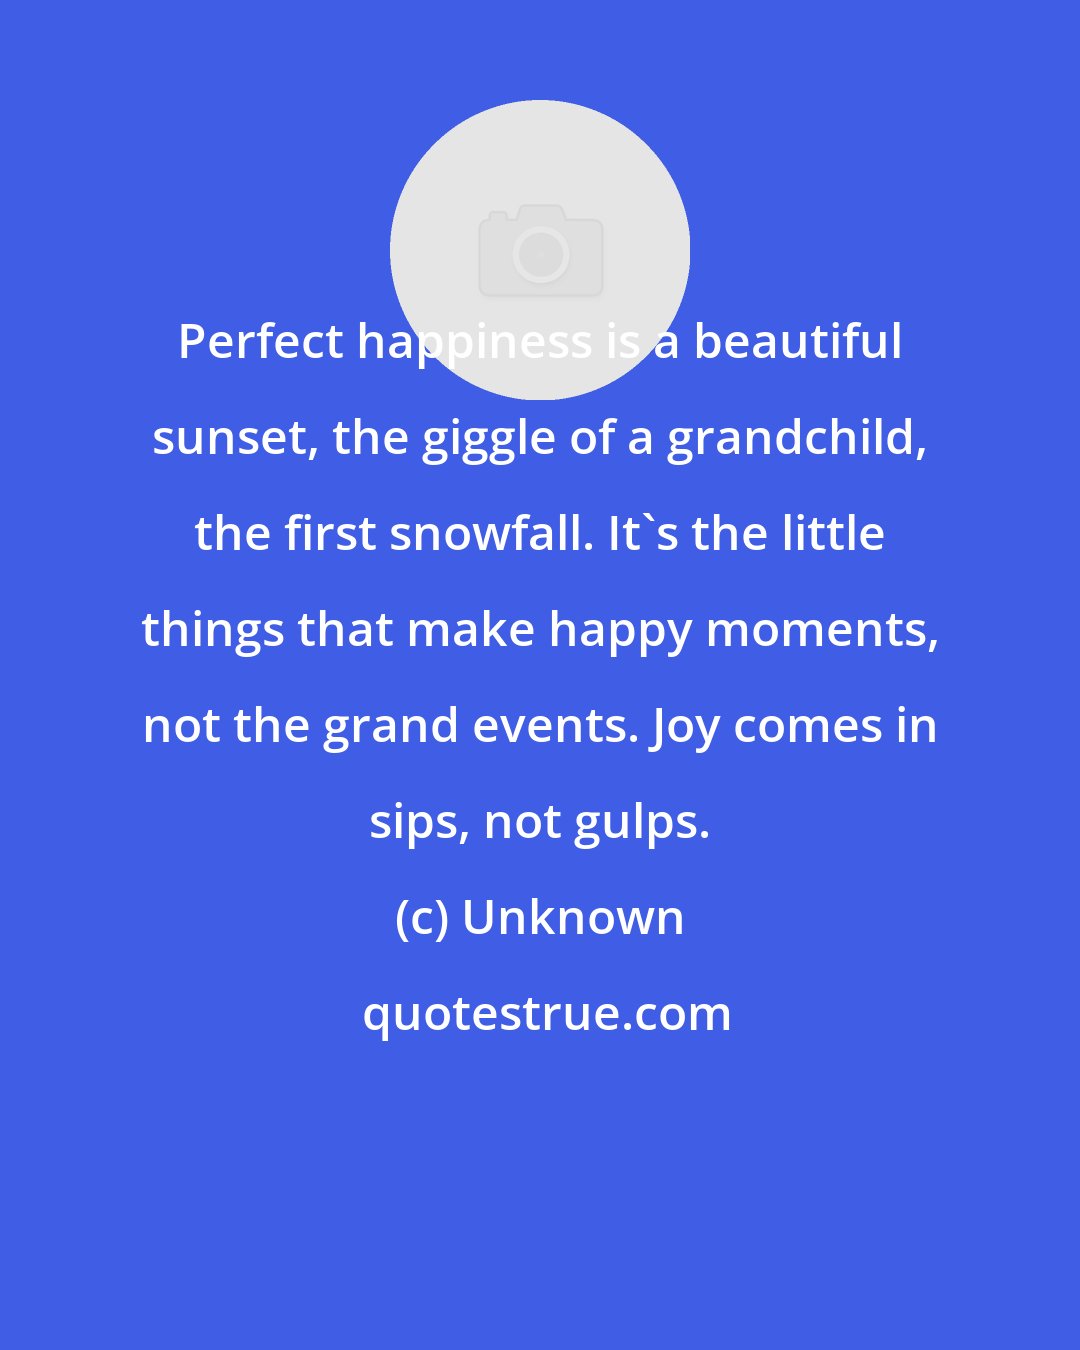 Unknown: Perfect happiness is a beautiful sunset, the giggle of a grandchild, the first snowfall. It's the little things that make happy moments, not the grand events. Joy comes in sips, not gulps.